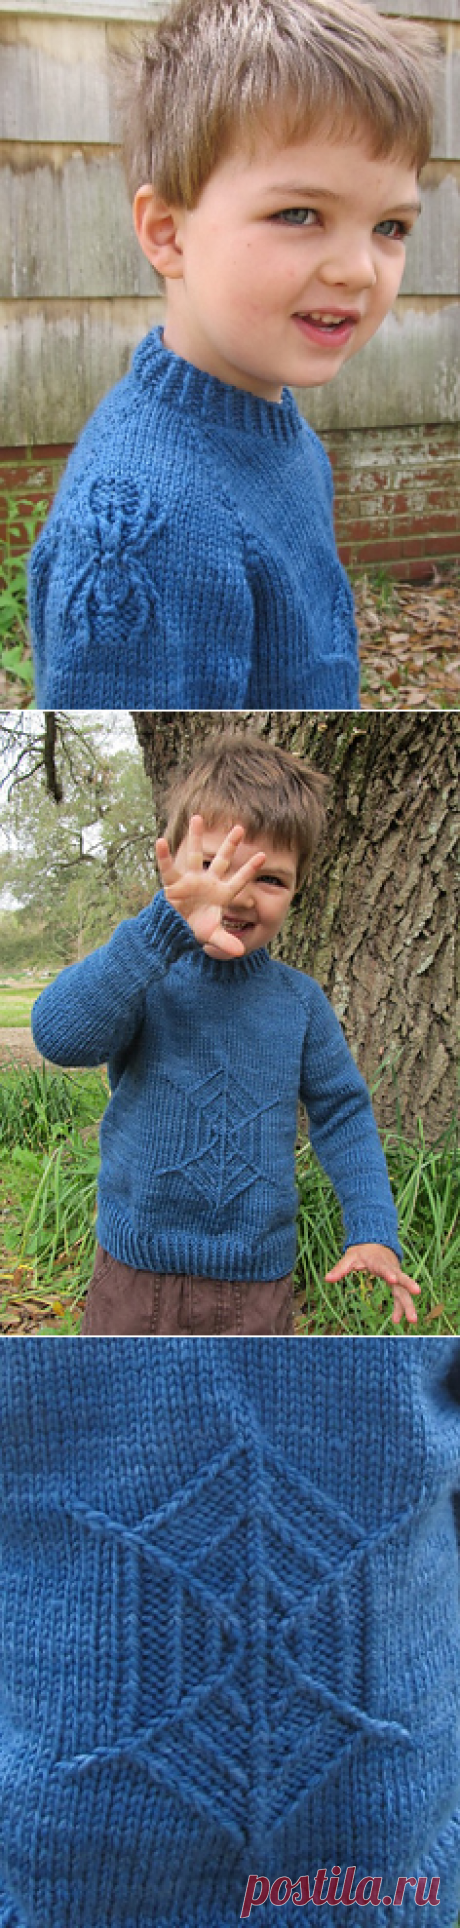 Ravelry: Something Wicked This Way Comes - Child pattern by Julia Blake